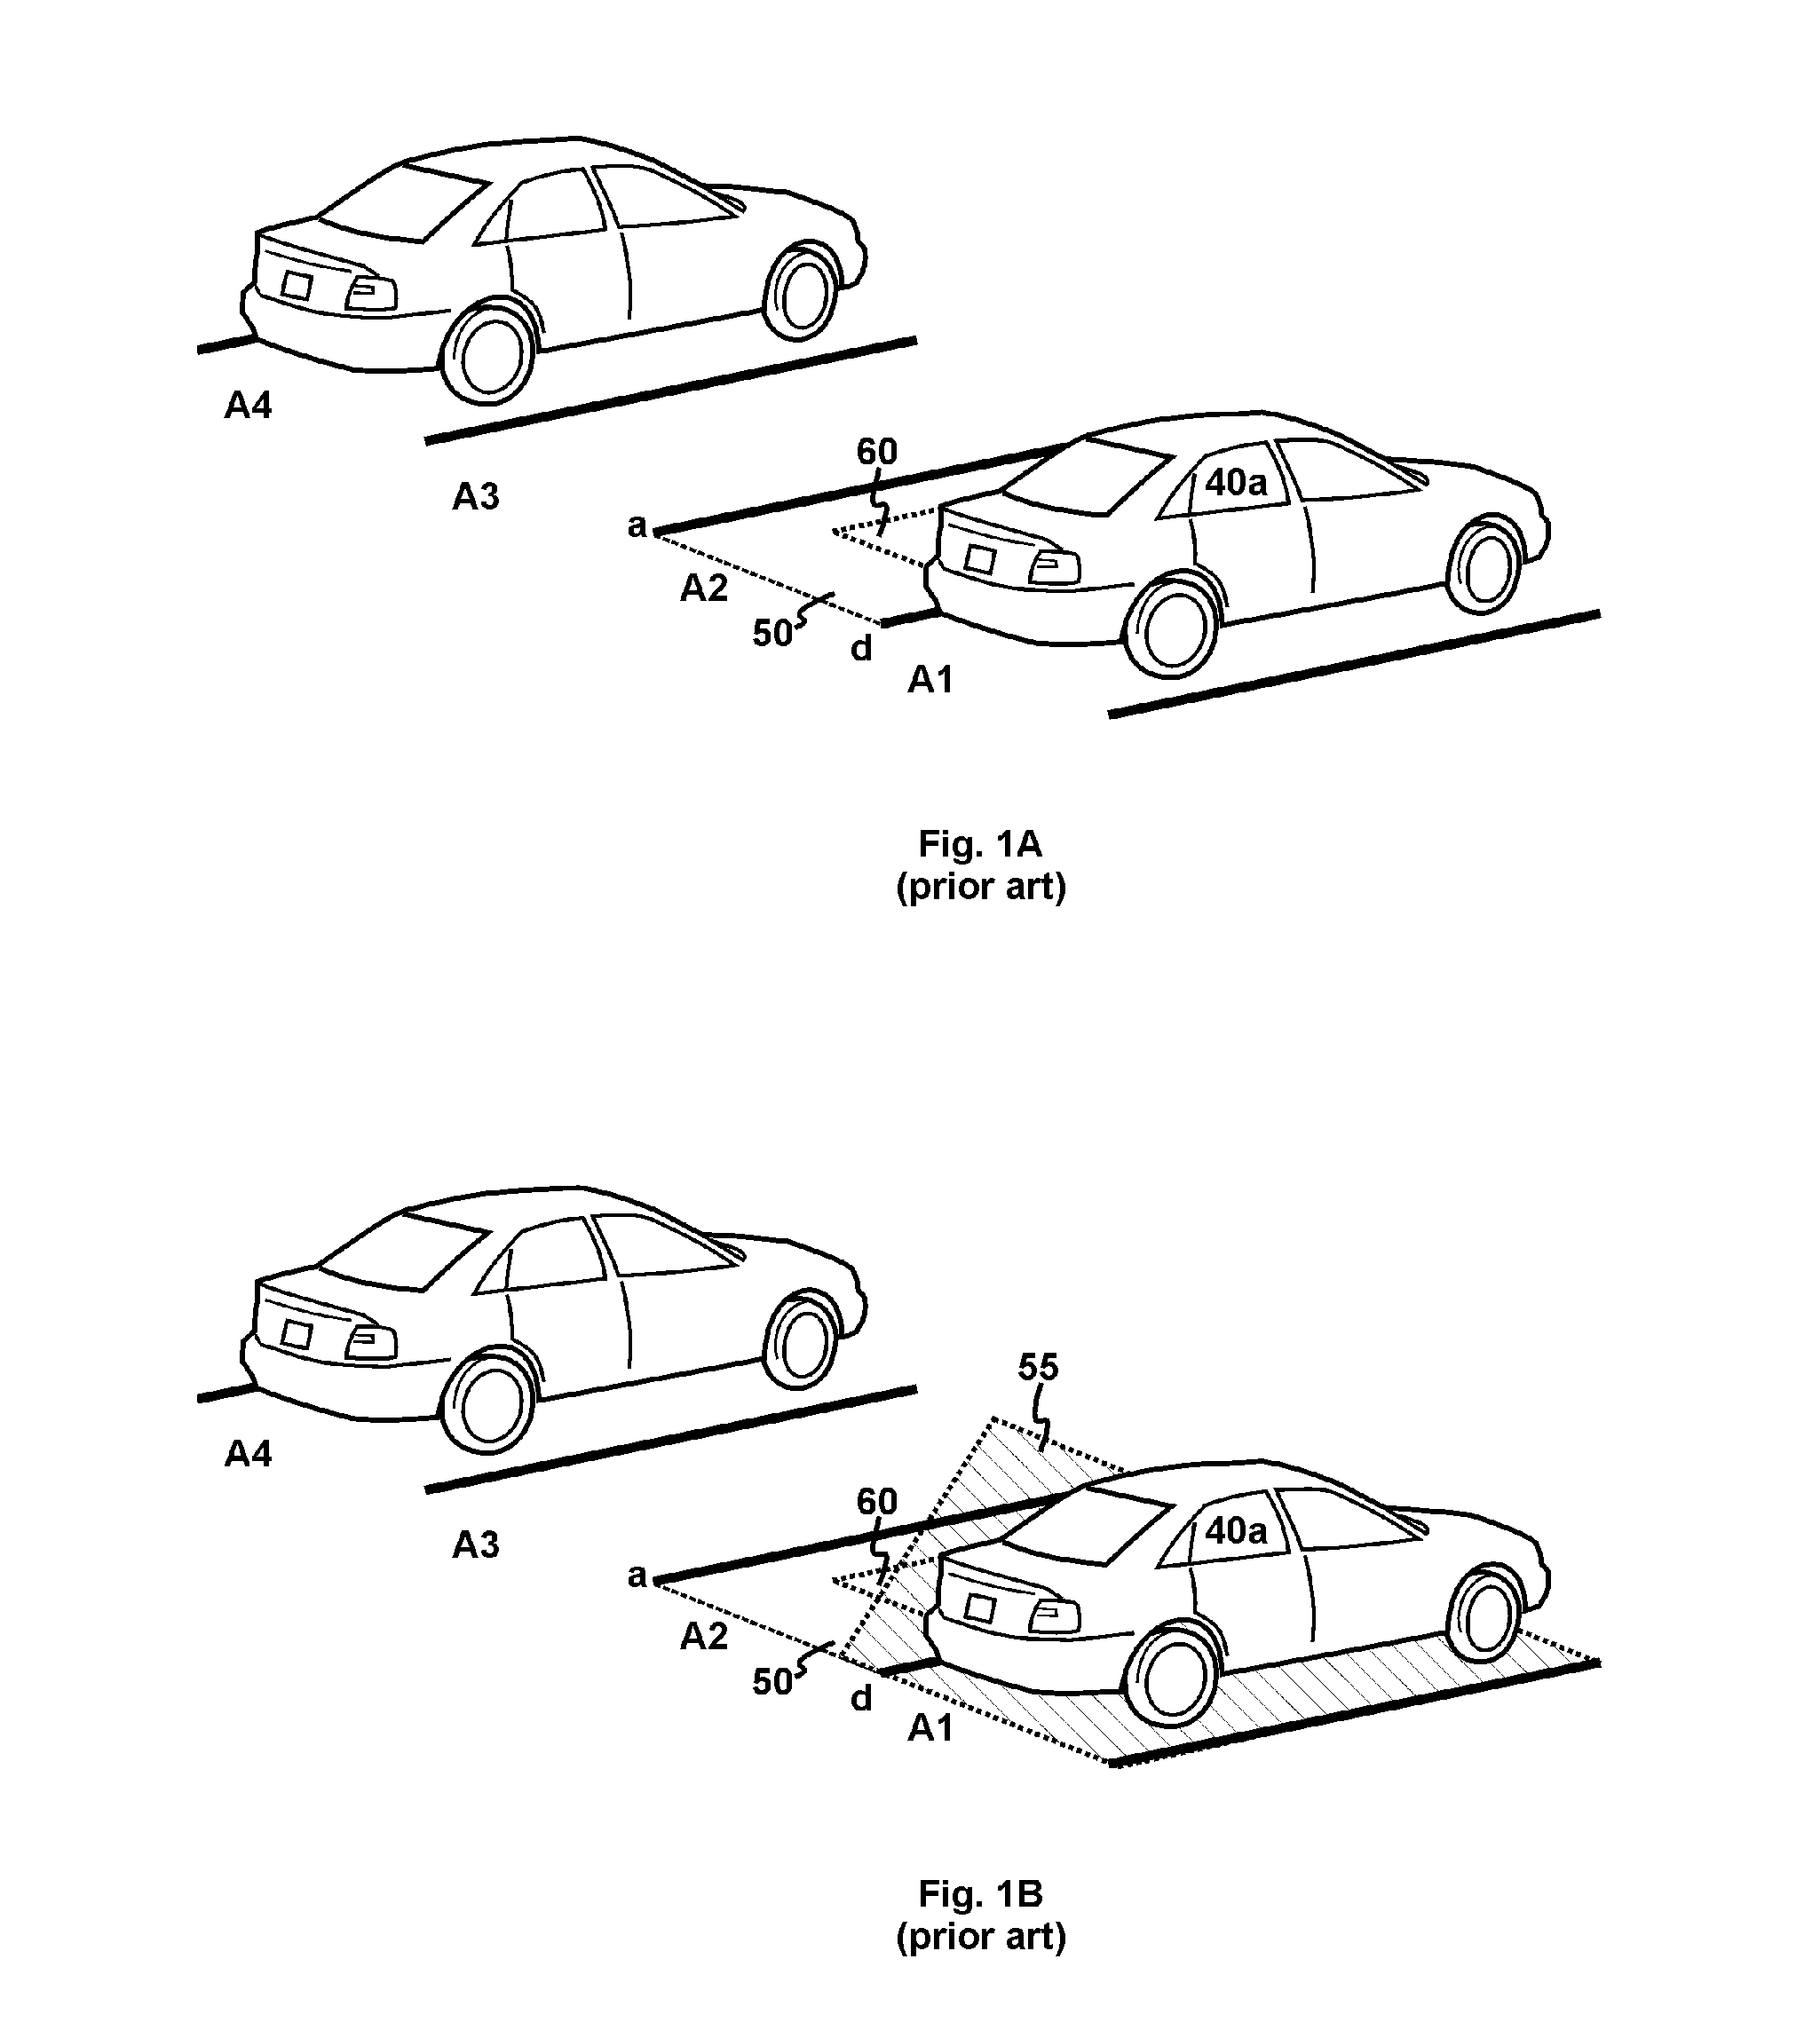 Parked vehicle detection based on edge detection